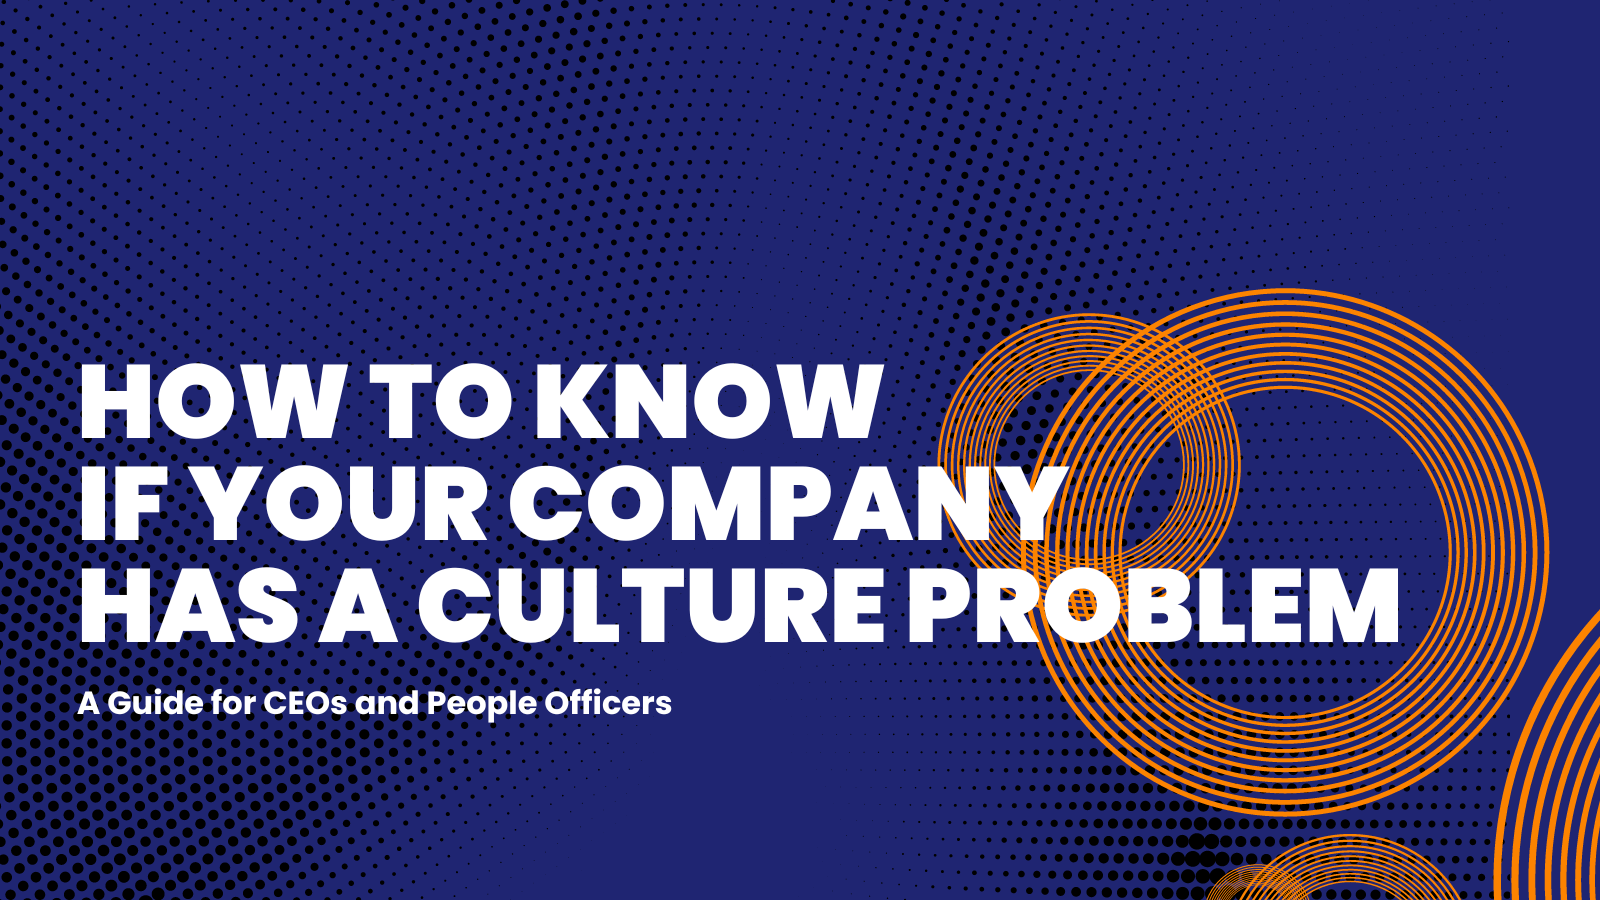 How to Know if Your Company Has a Culture Challenge: A Guide for CEOs and People Officers